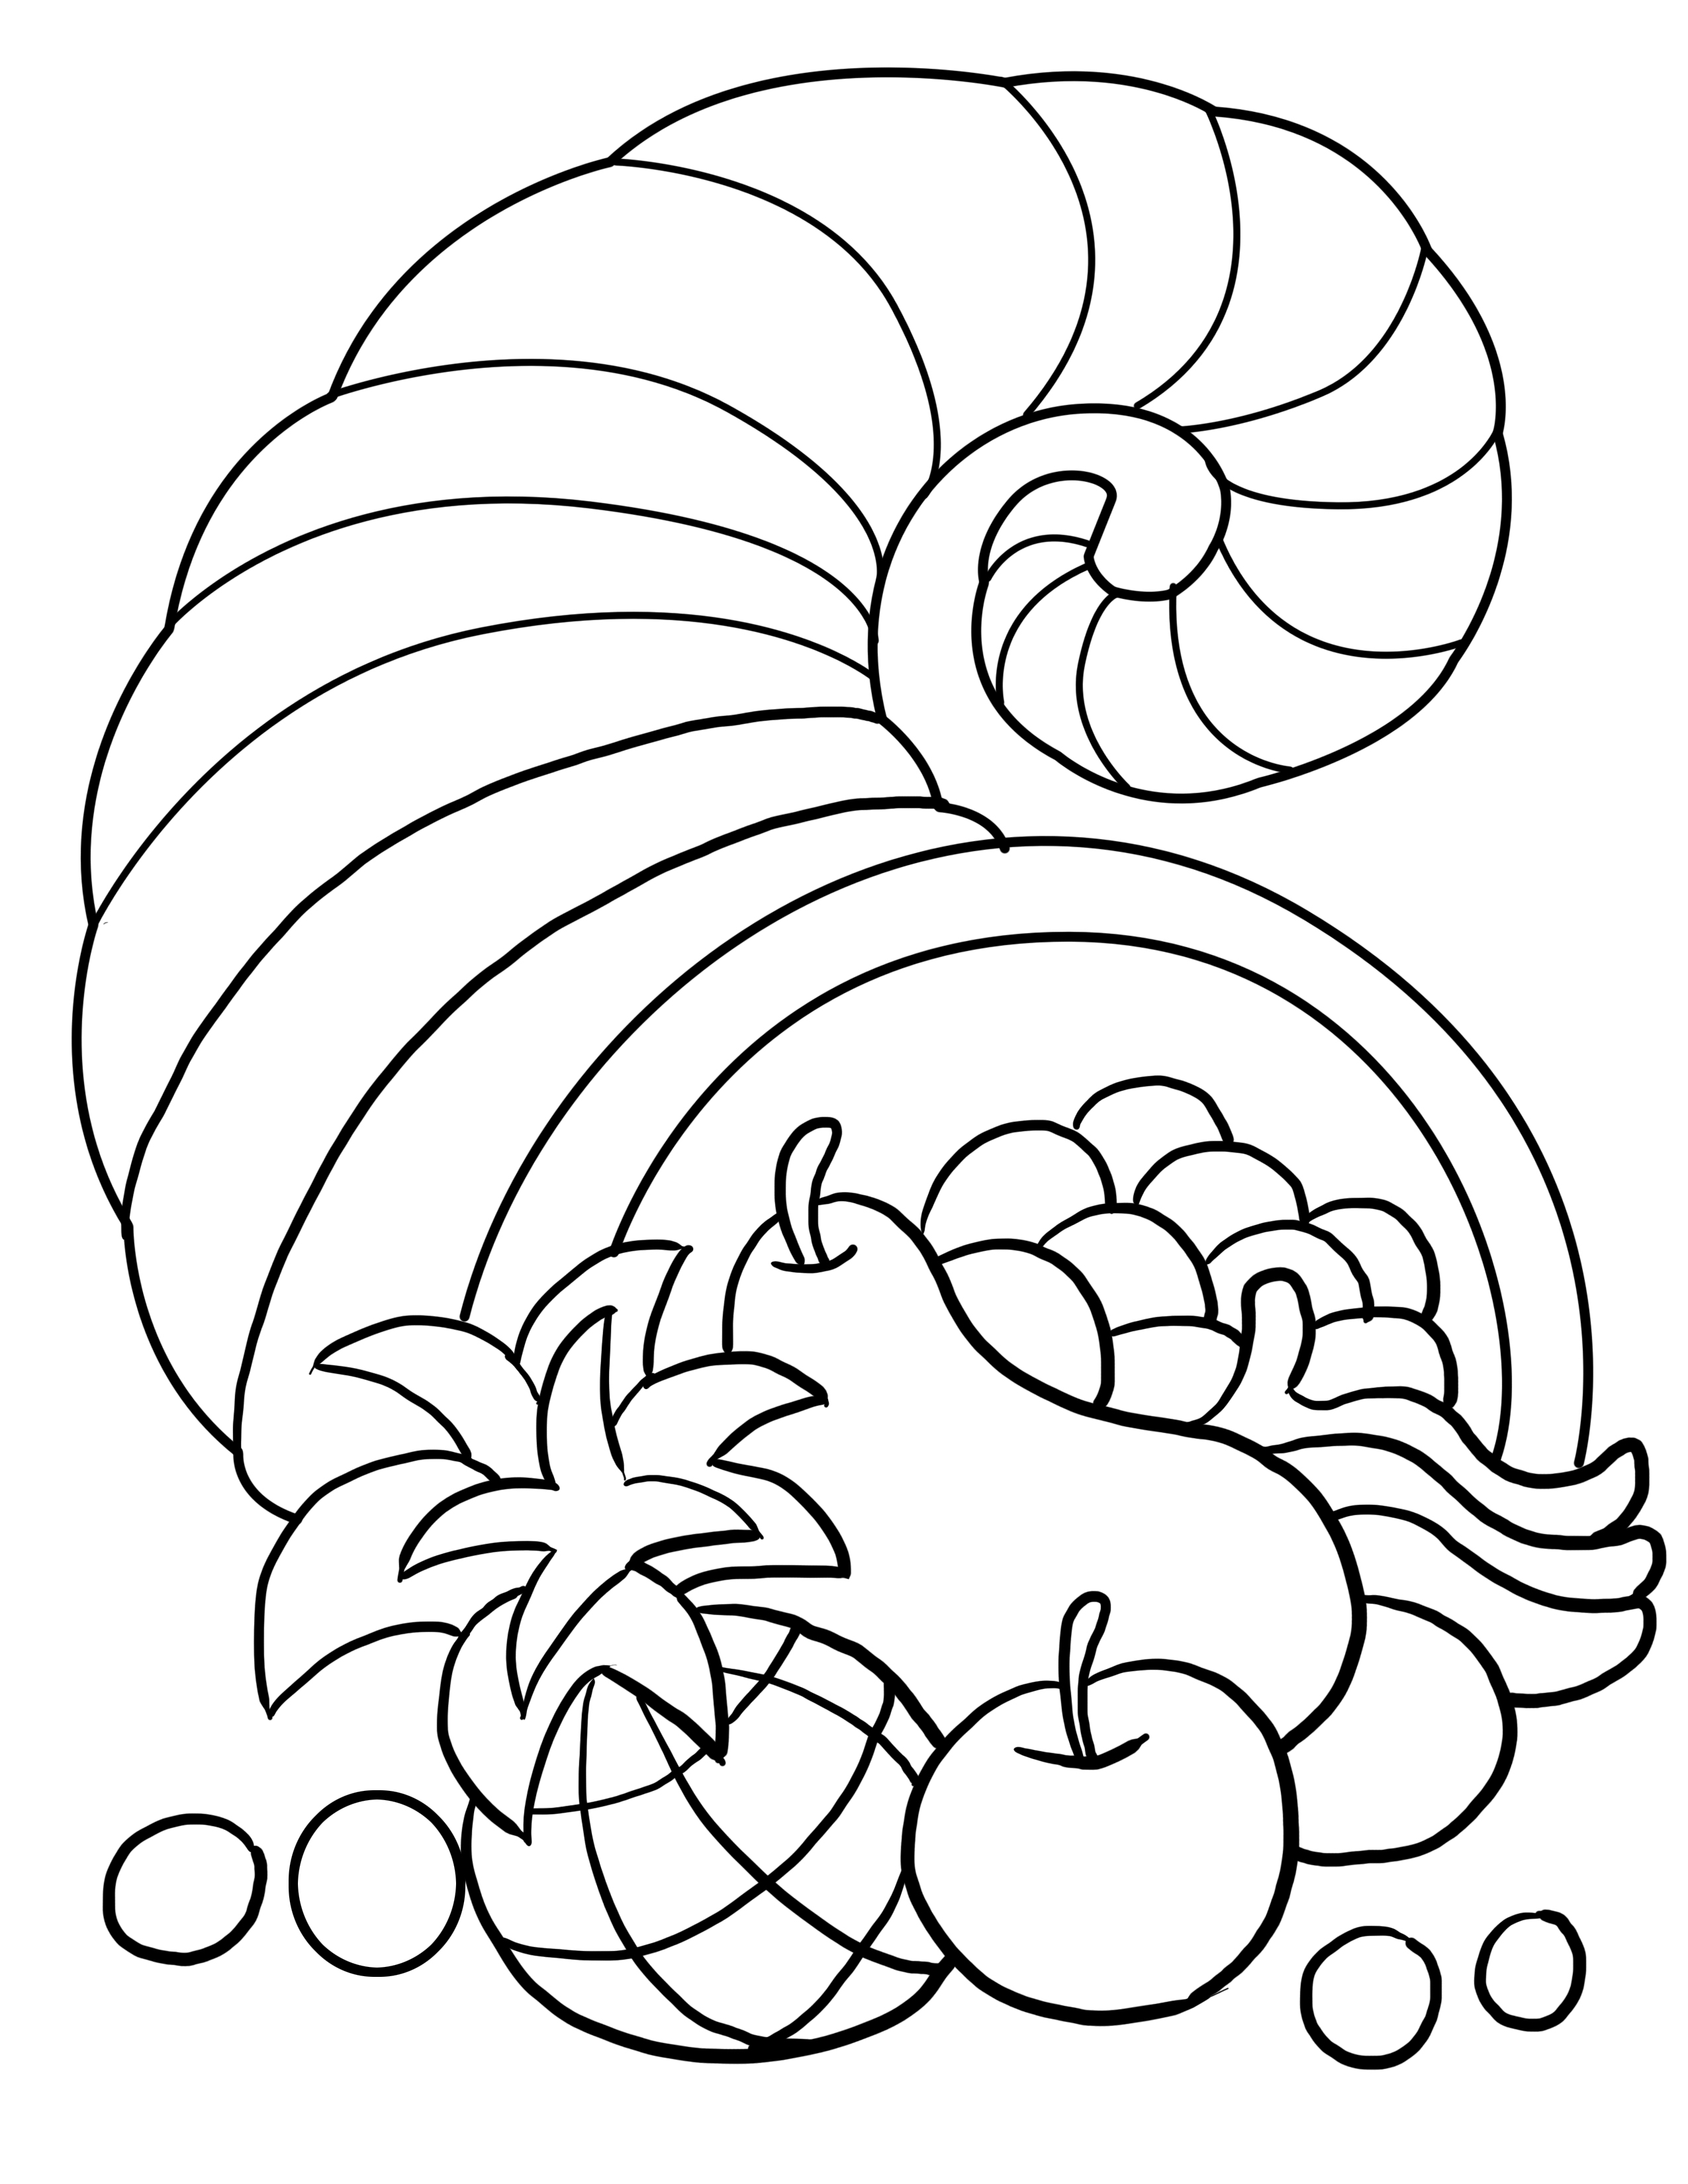 Printable Thanksgiving Coloring Pages ColoringMe